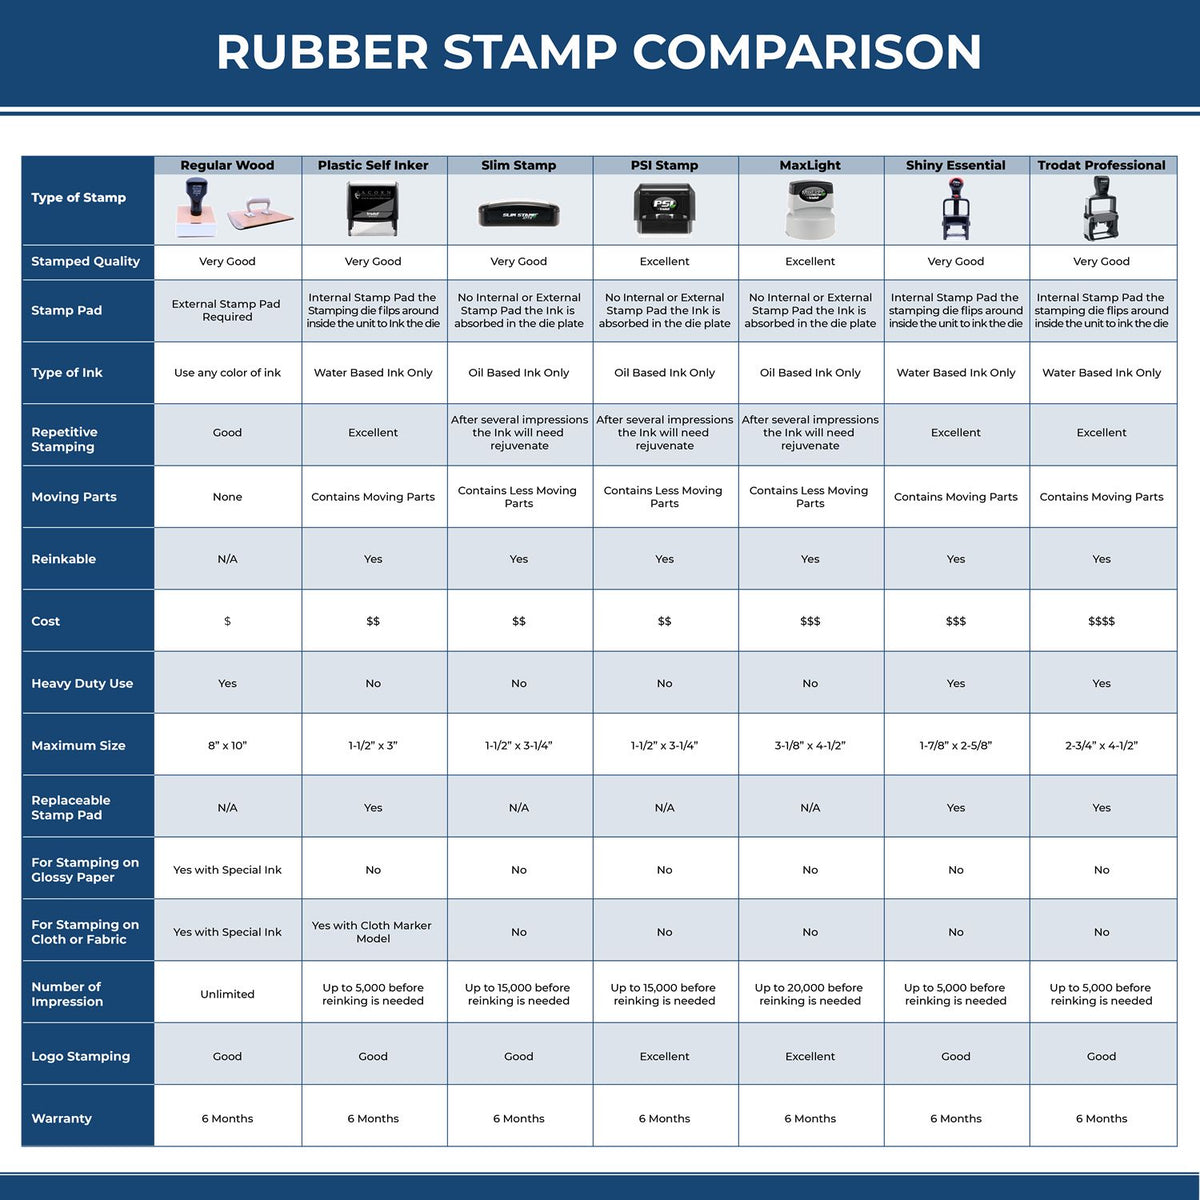 A comparison chart for the different types of mount models available for the Wooden Handle Iowa State Seal Notary Public Stamp.